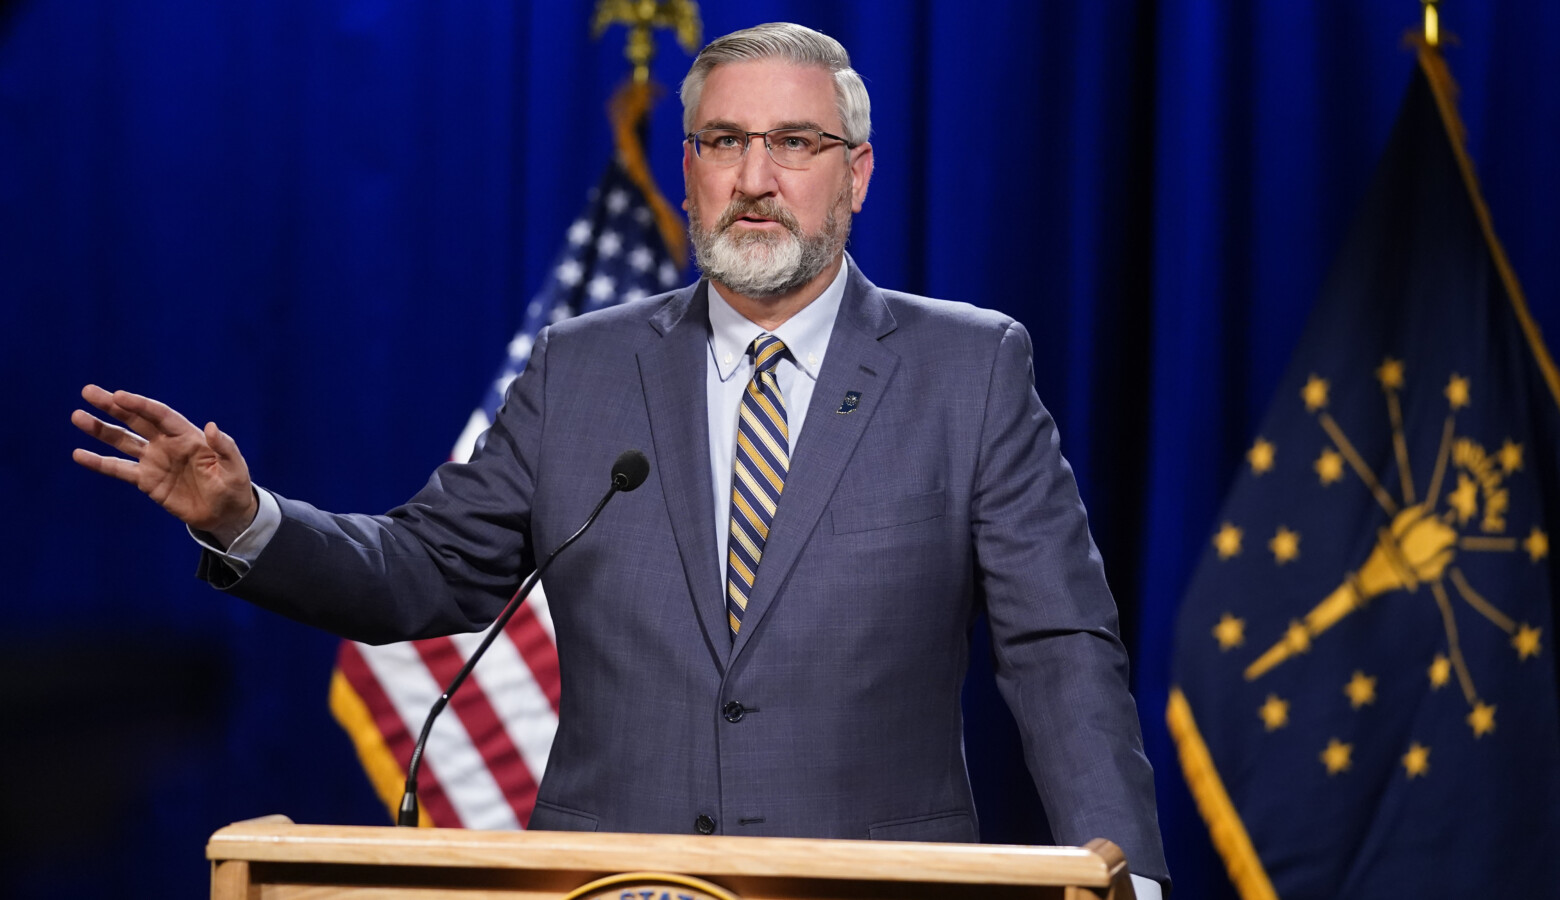 In his 2021 State of the State address, Gov. Eric Holcomb unveiled his plan to create a new, regional development initiative that he said will help the state’s economy recover from the COVID-19 pandemic. (Darron Cummings/Associated Press)